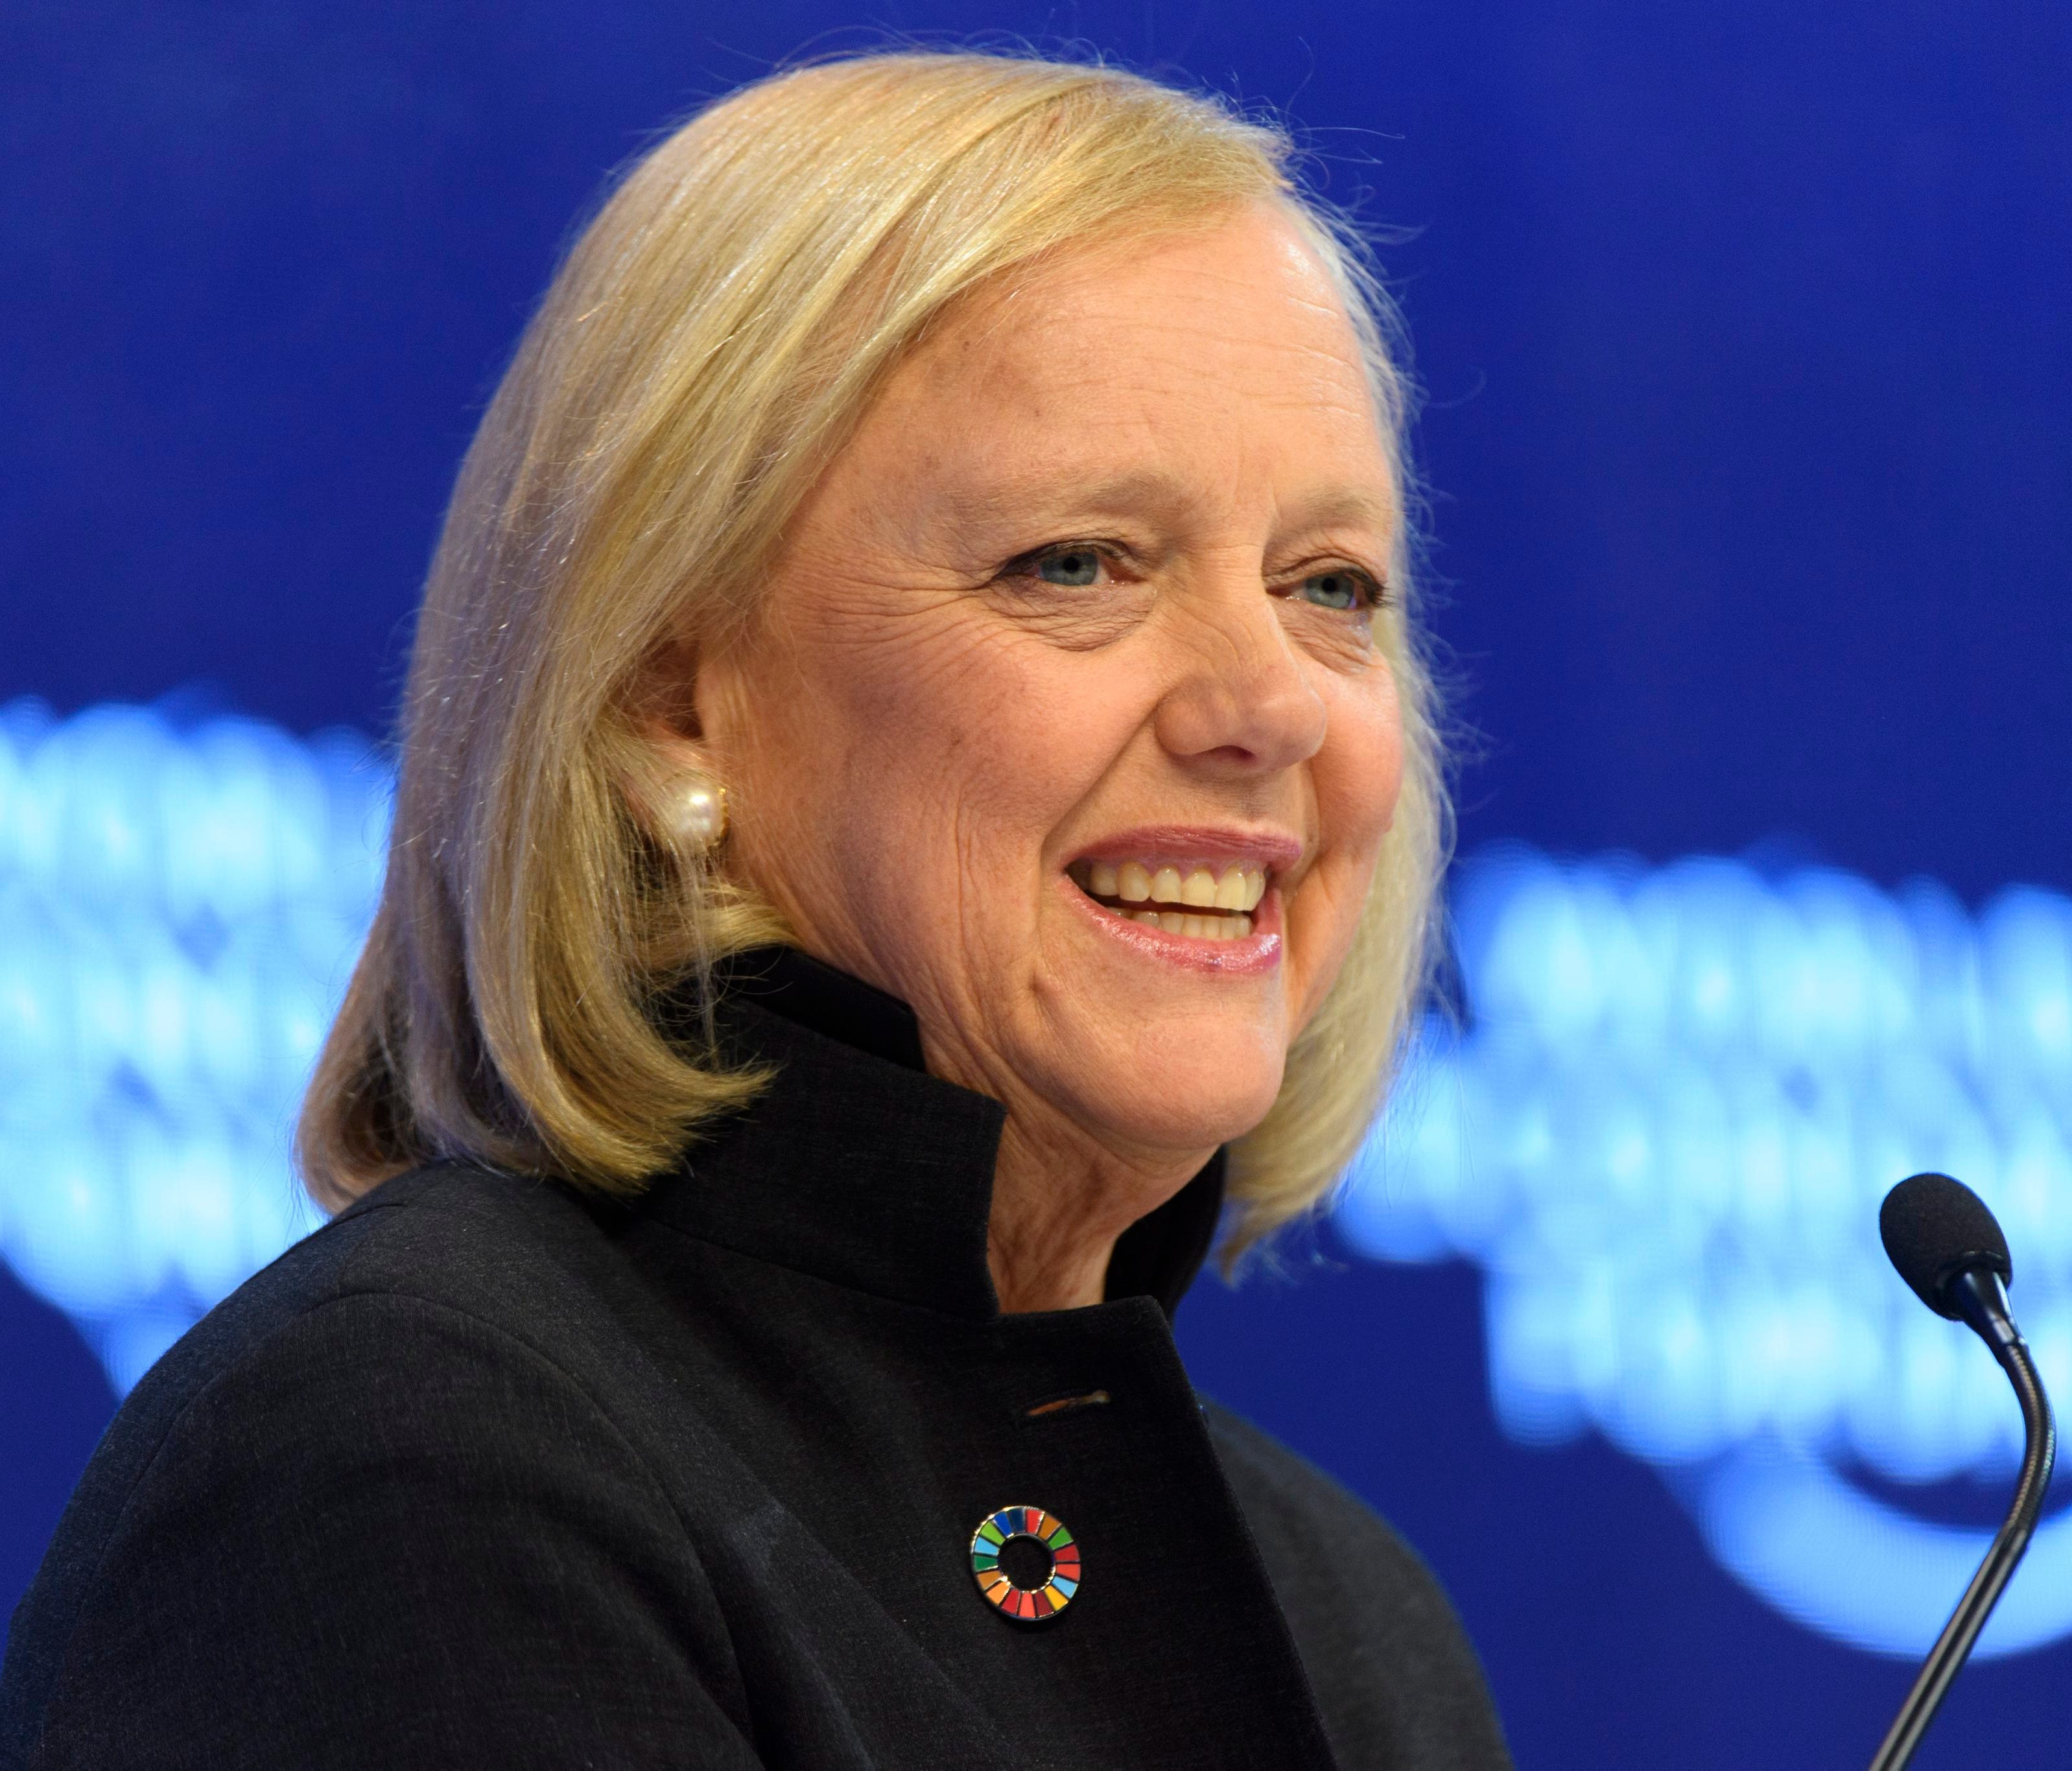 Meg Whitman, chairman and CEO of Hewlett-Packard speaks during a plenary session in the Congress Hall at the 47th annual meeting of the World Economic Forum, WEF, in Davos, Switzerland, on Jan. 18, 2017.